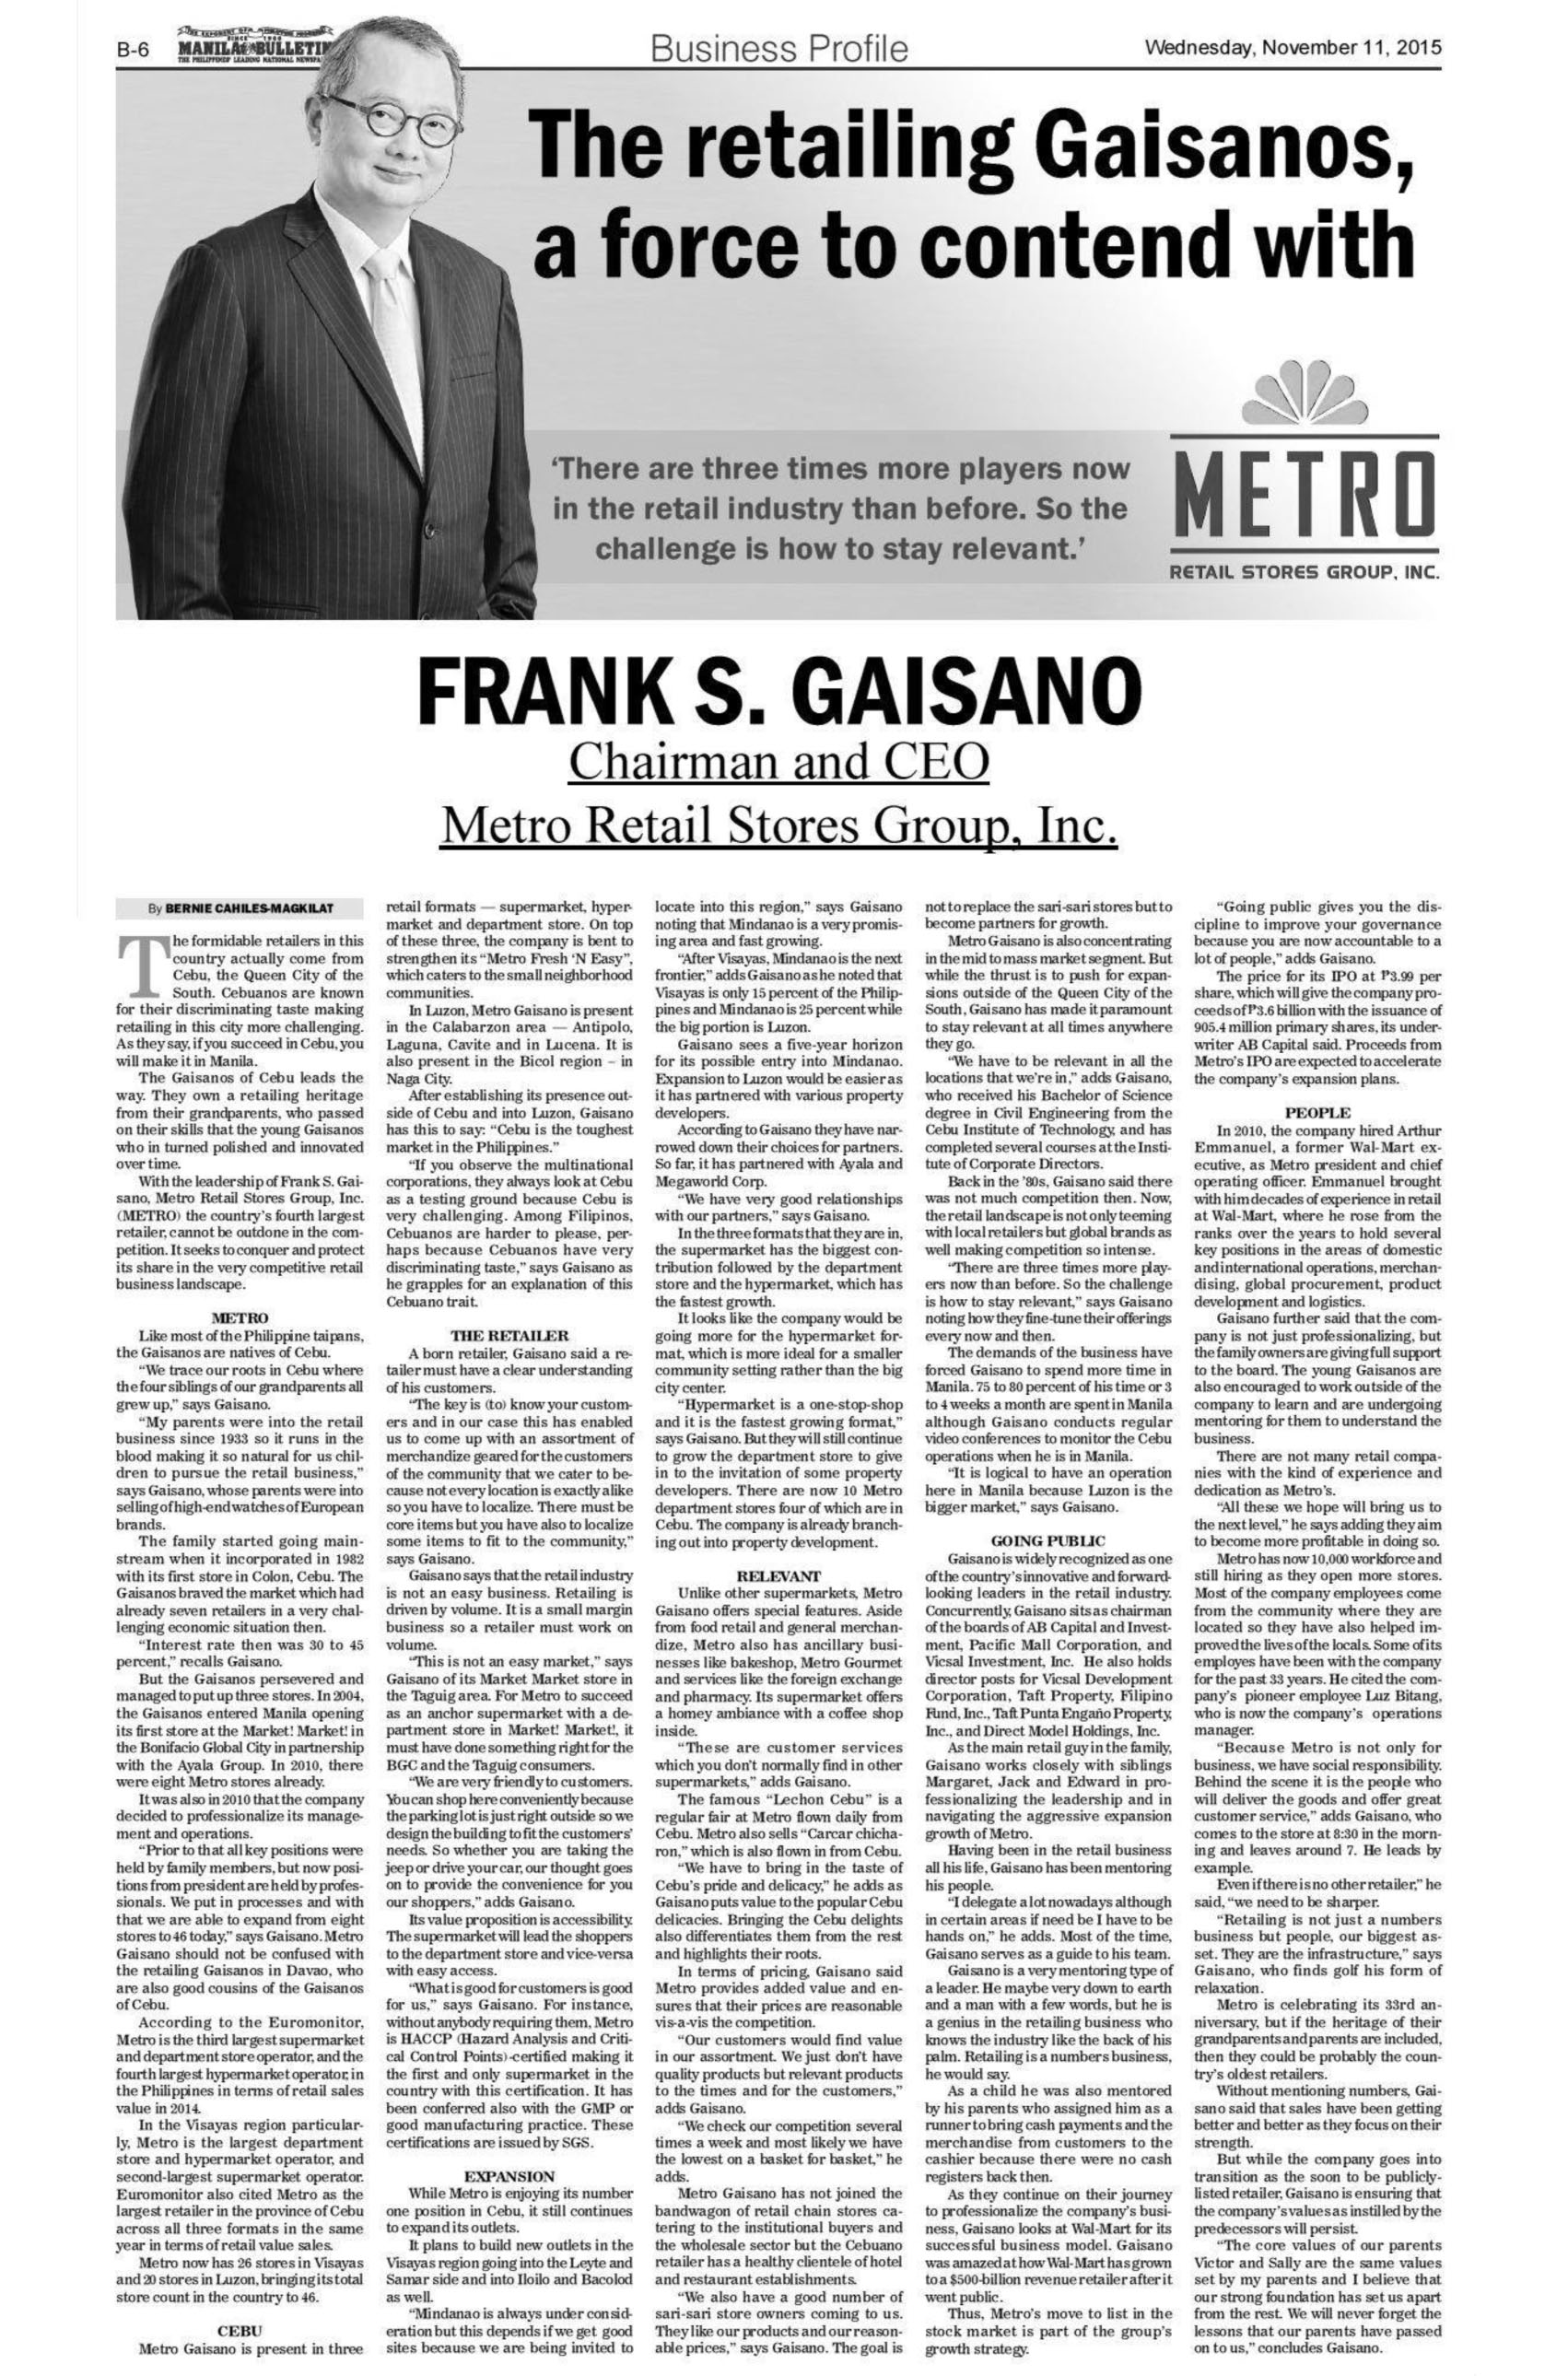 The retailing Gaisanos a force to contend with Manila Bulletin